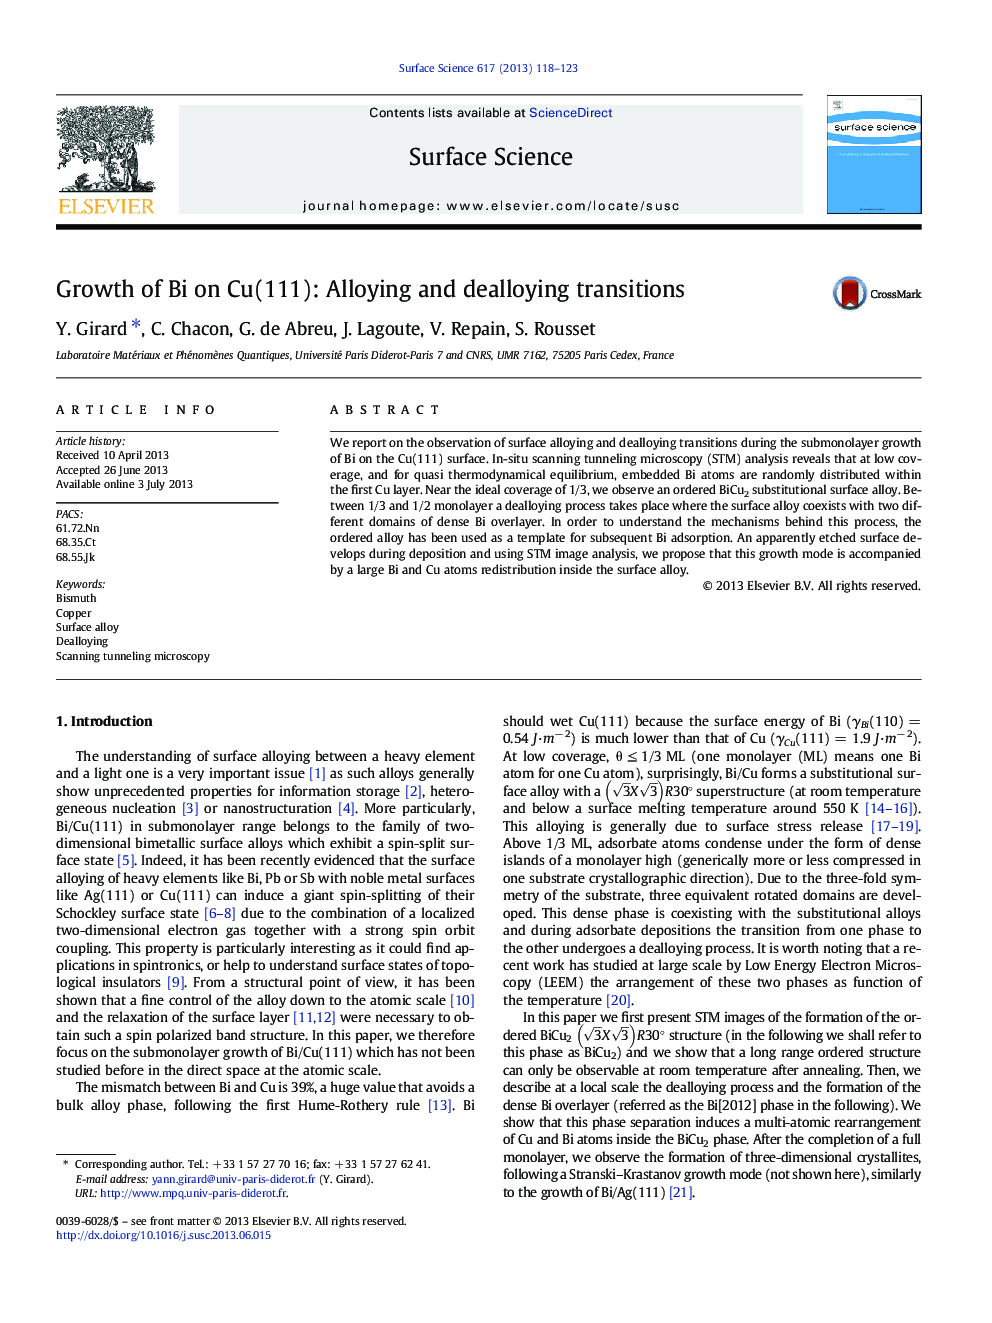 Growth of Bi on Cu(111): Alloying and dealloying transitions